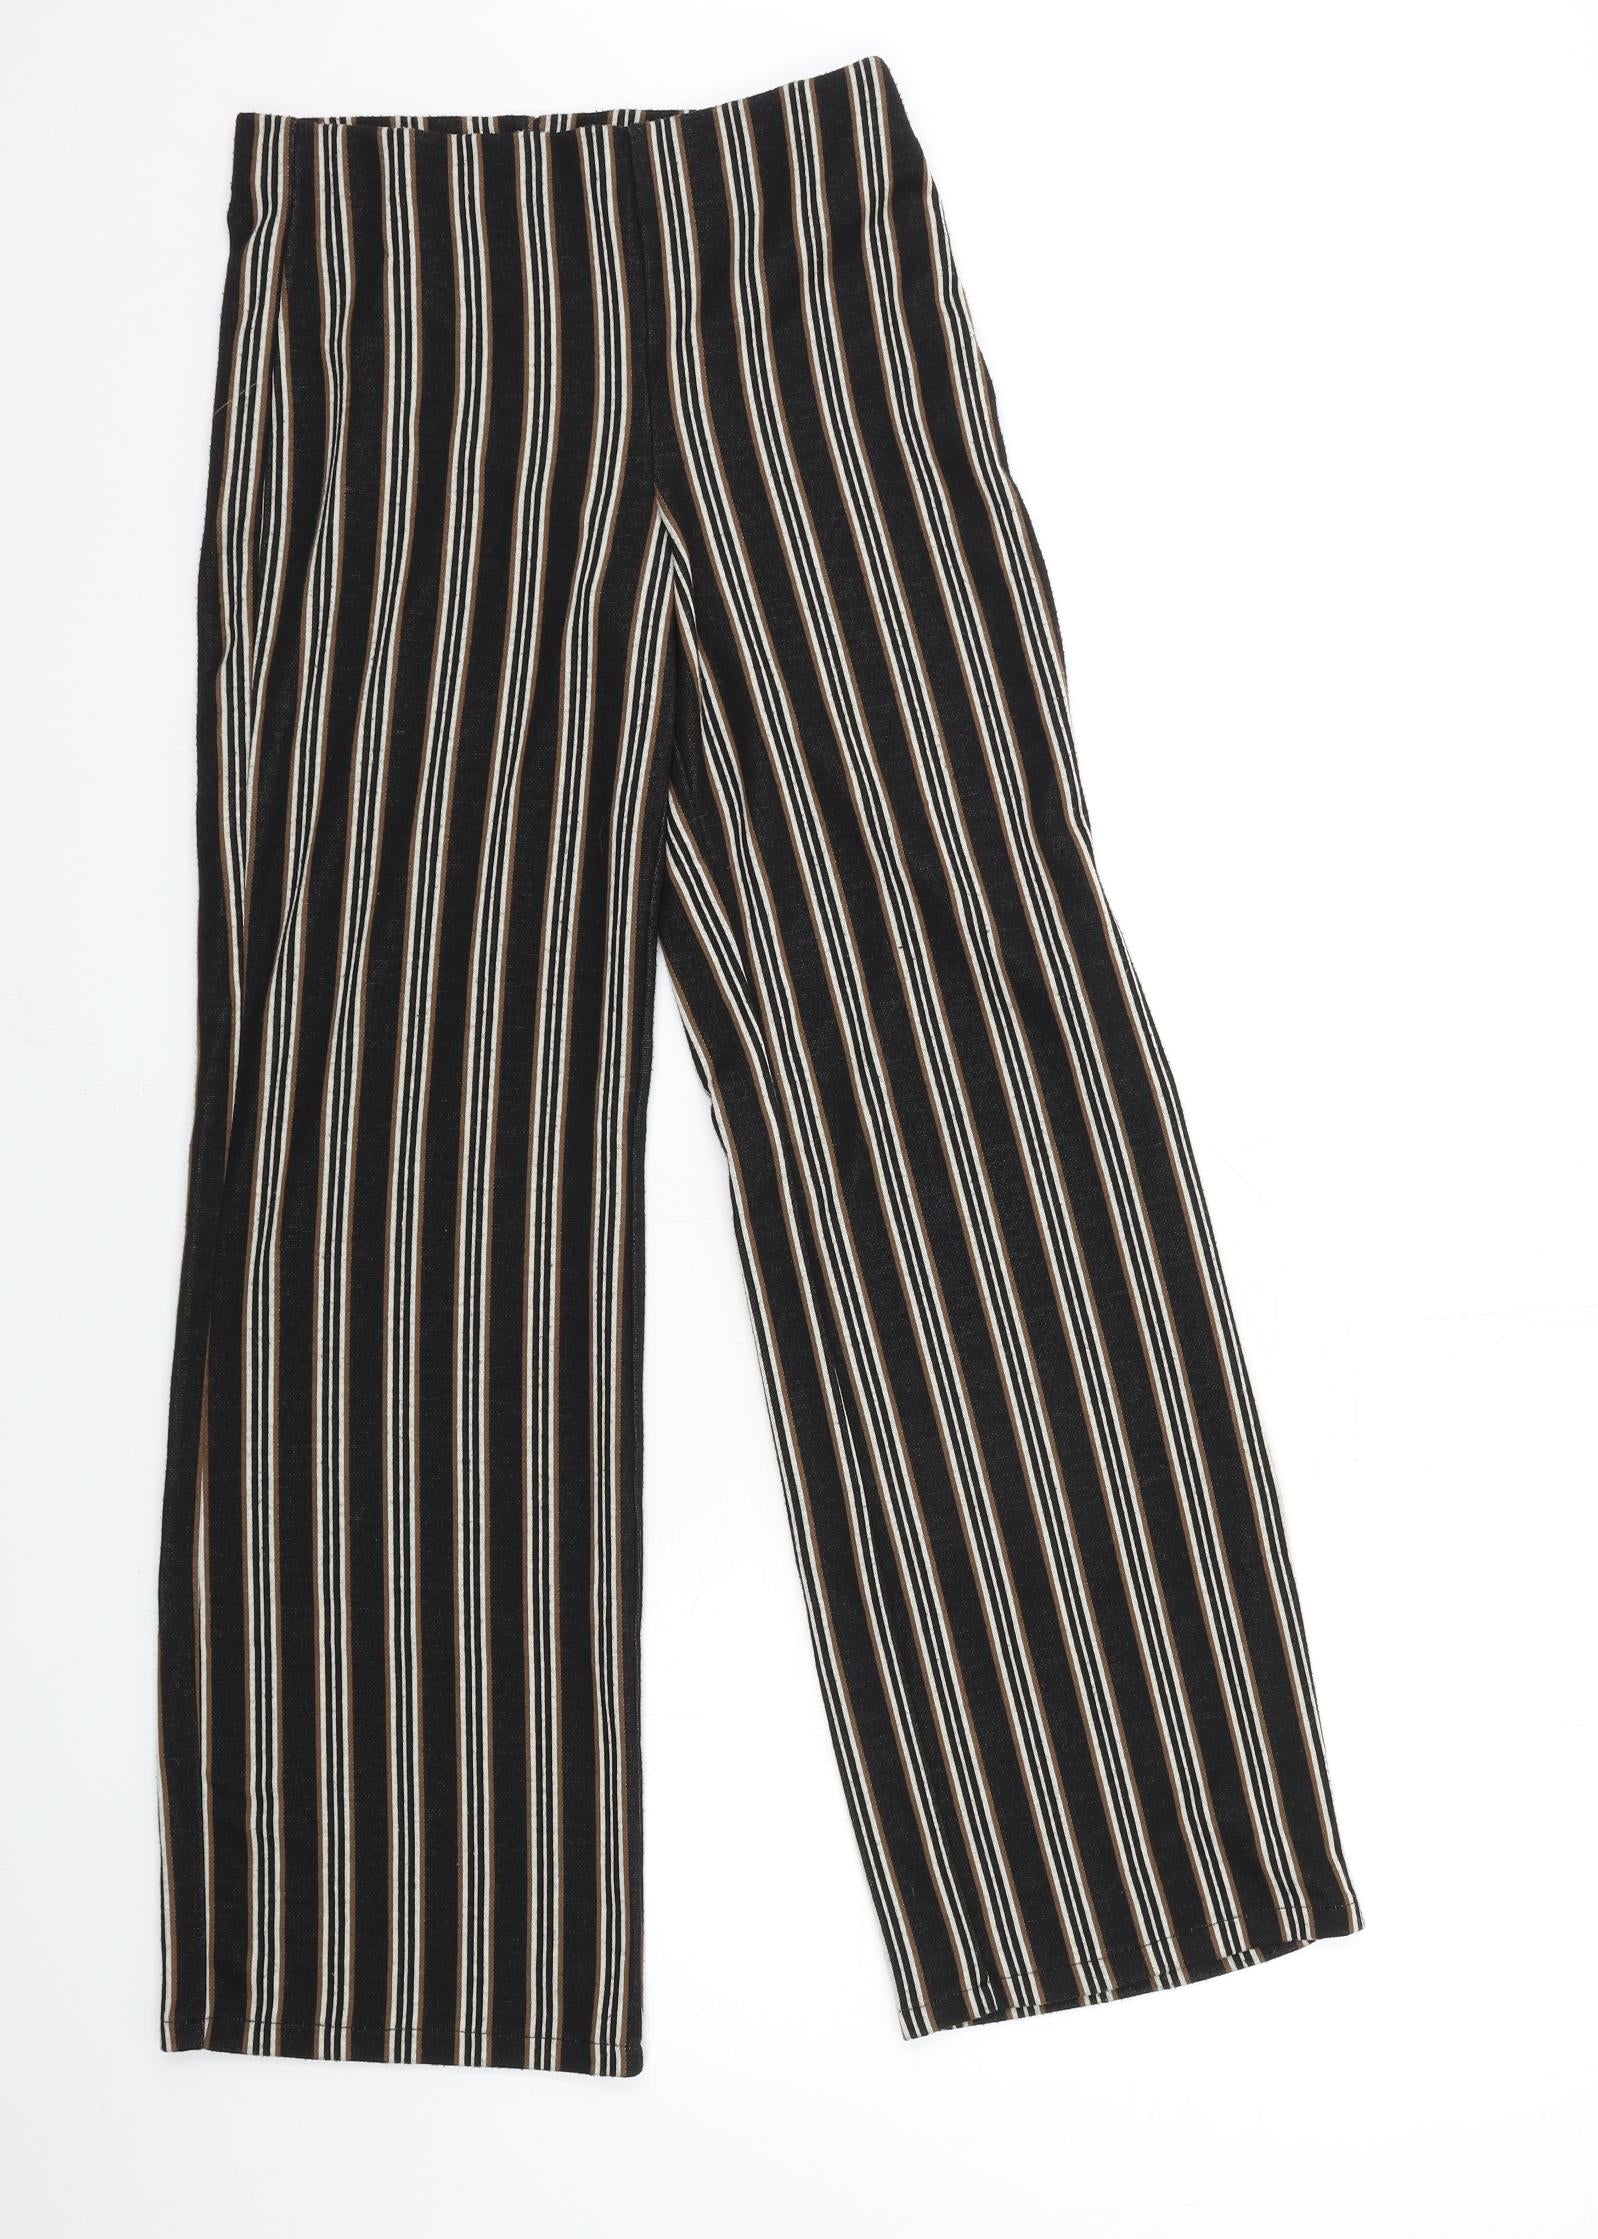 River Island Size 12 Blue And White Stripe Tapered Trousers Tie Waist Bnwt   eBay